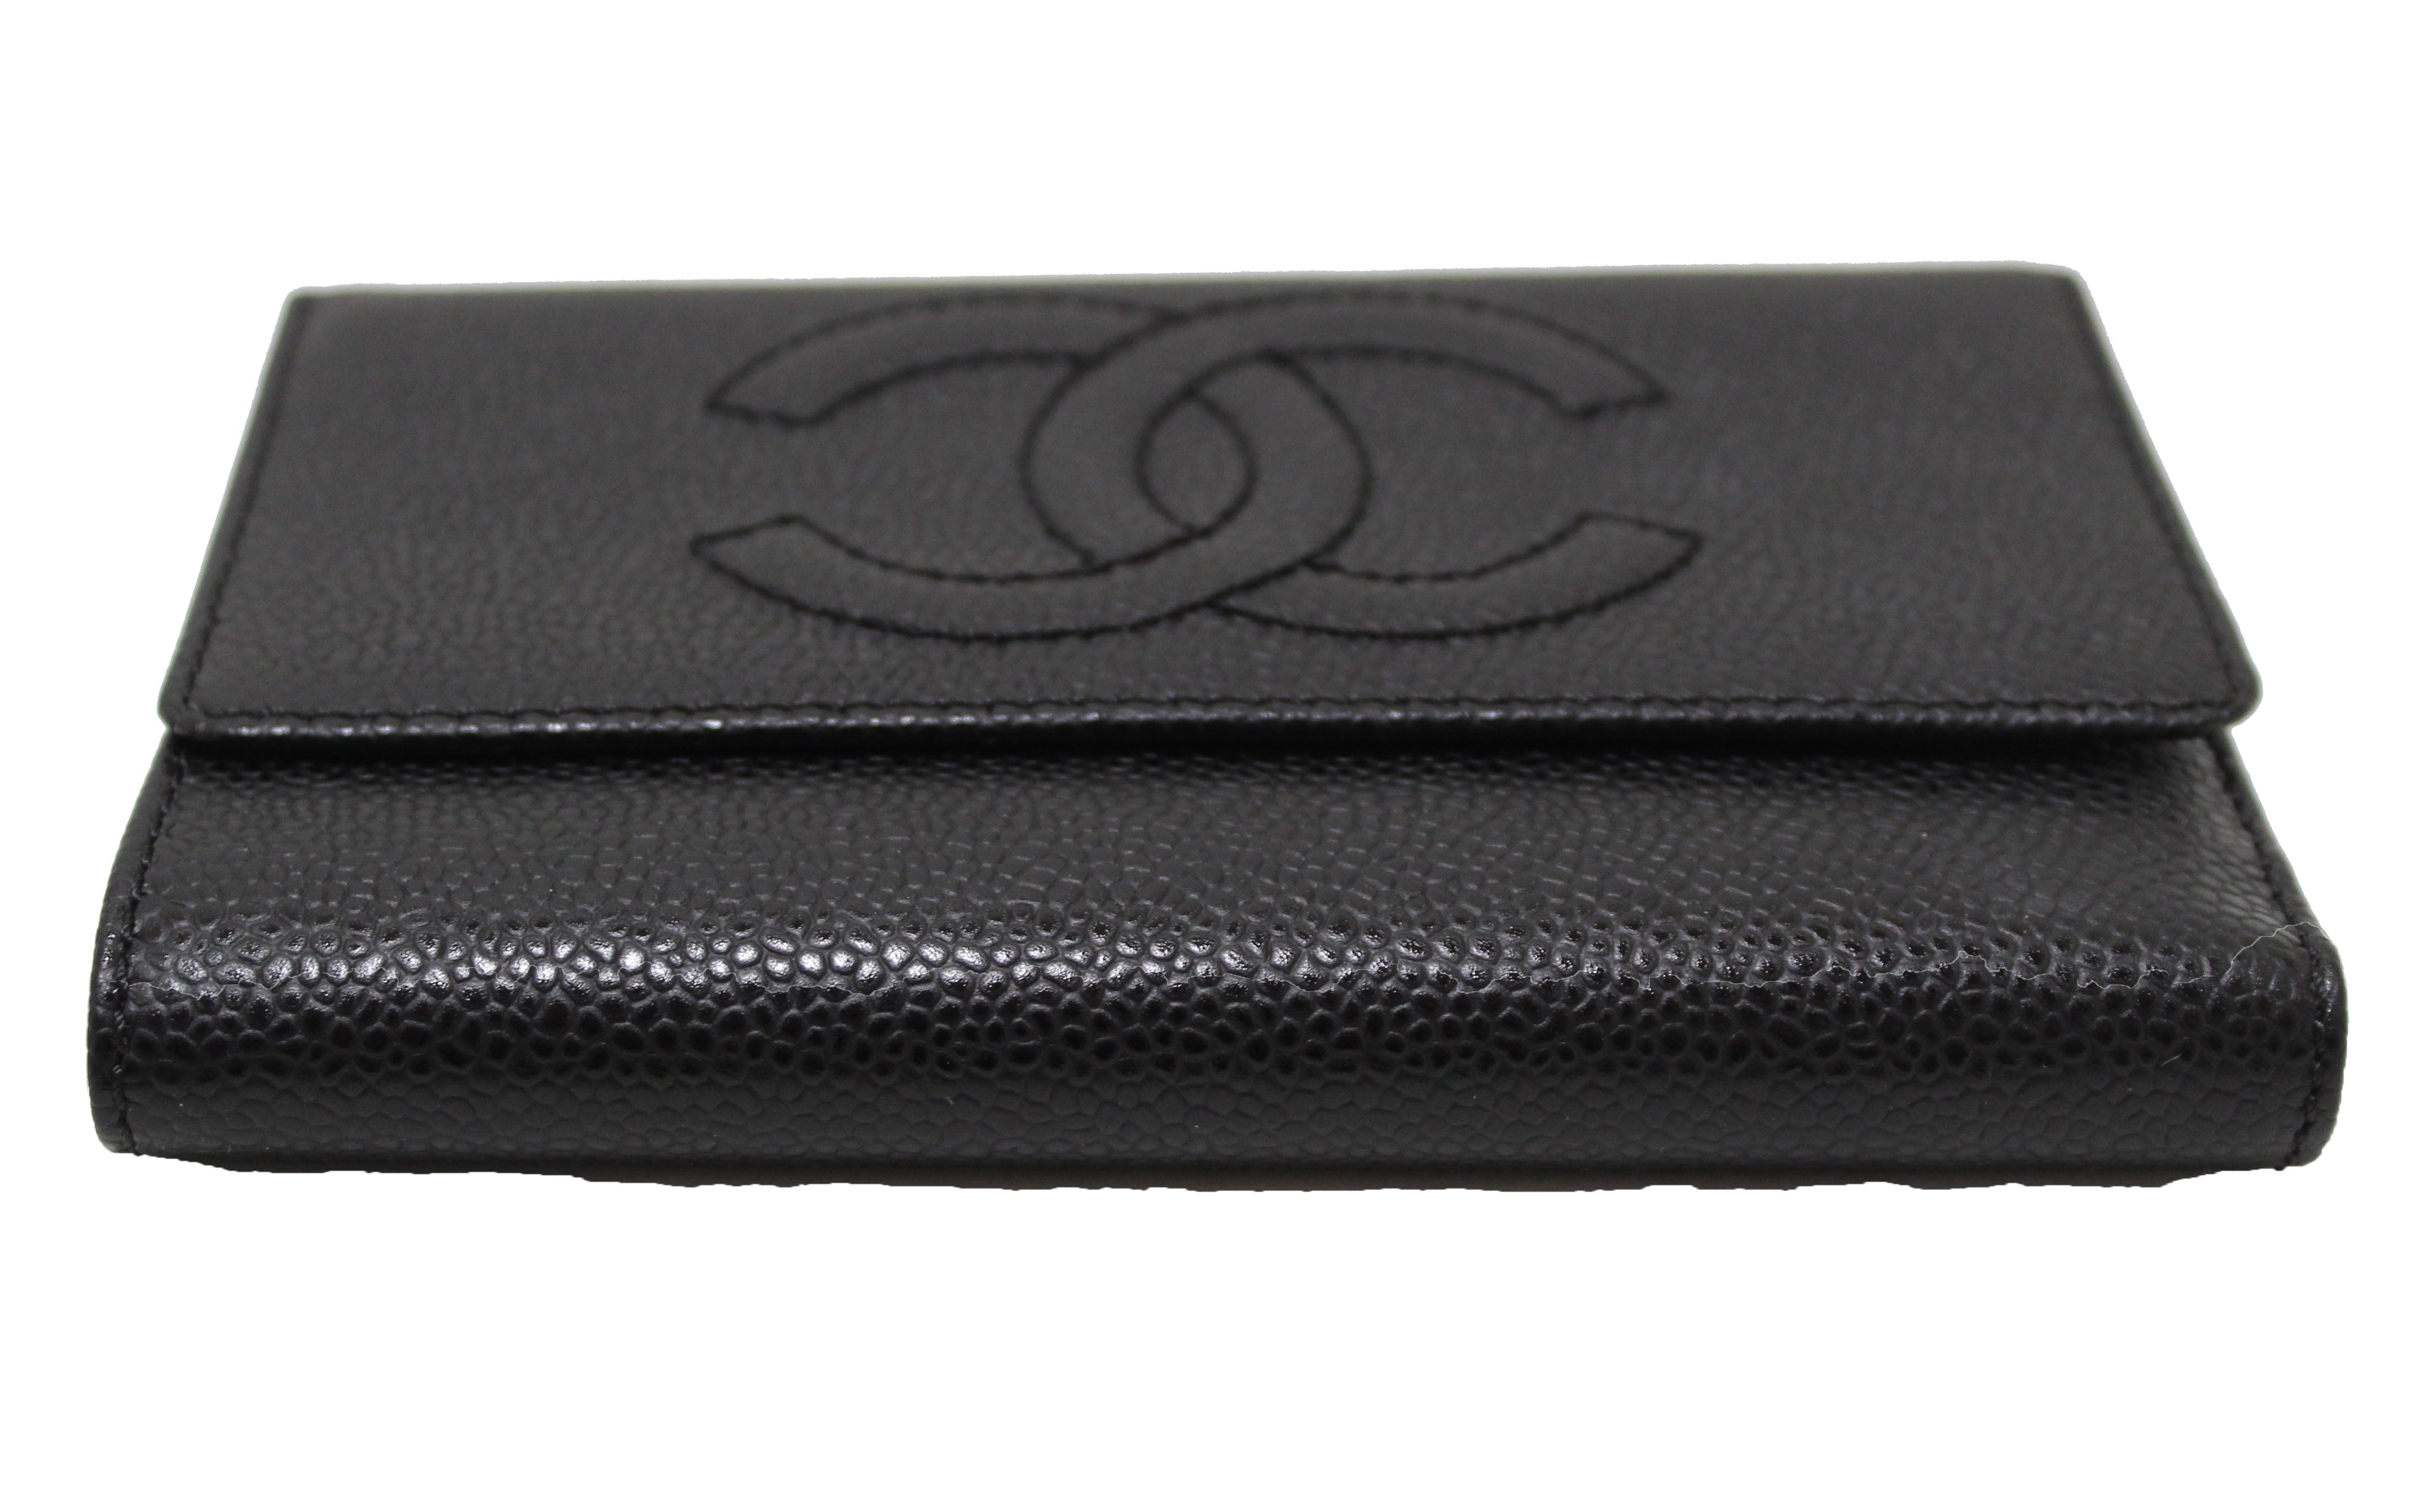 CHANEL, Bags, Chanel Cc Button Compact Bifold Wallet